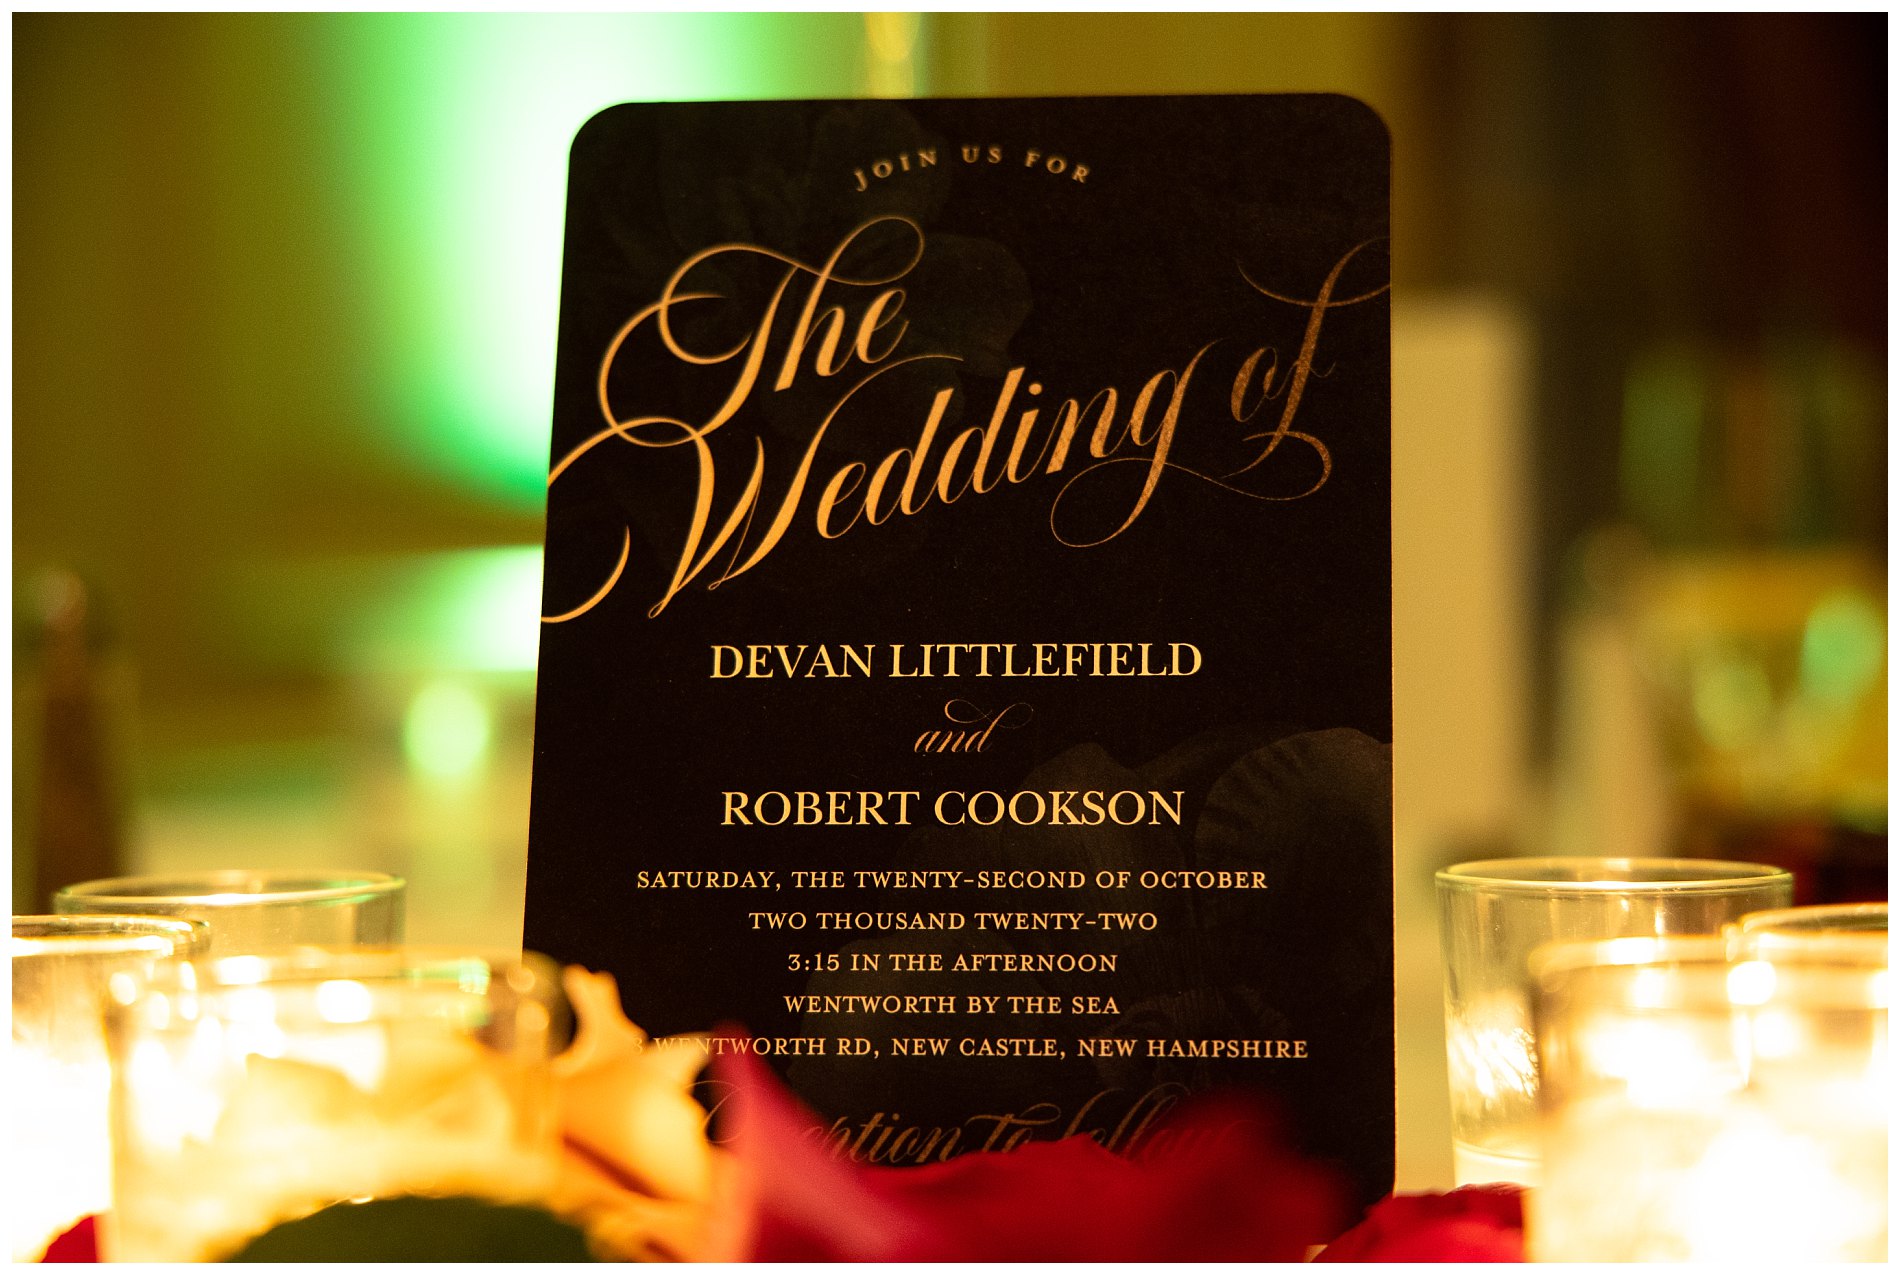 The wedding invite among candles at the event